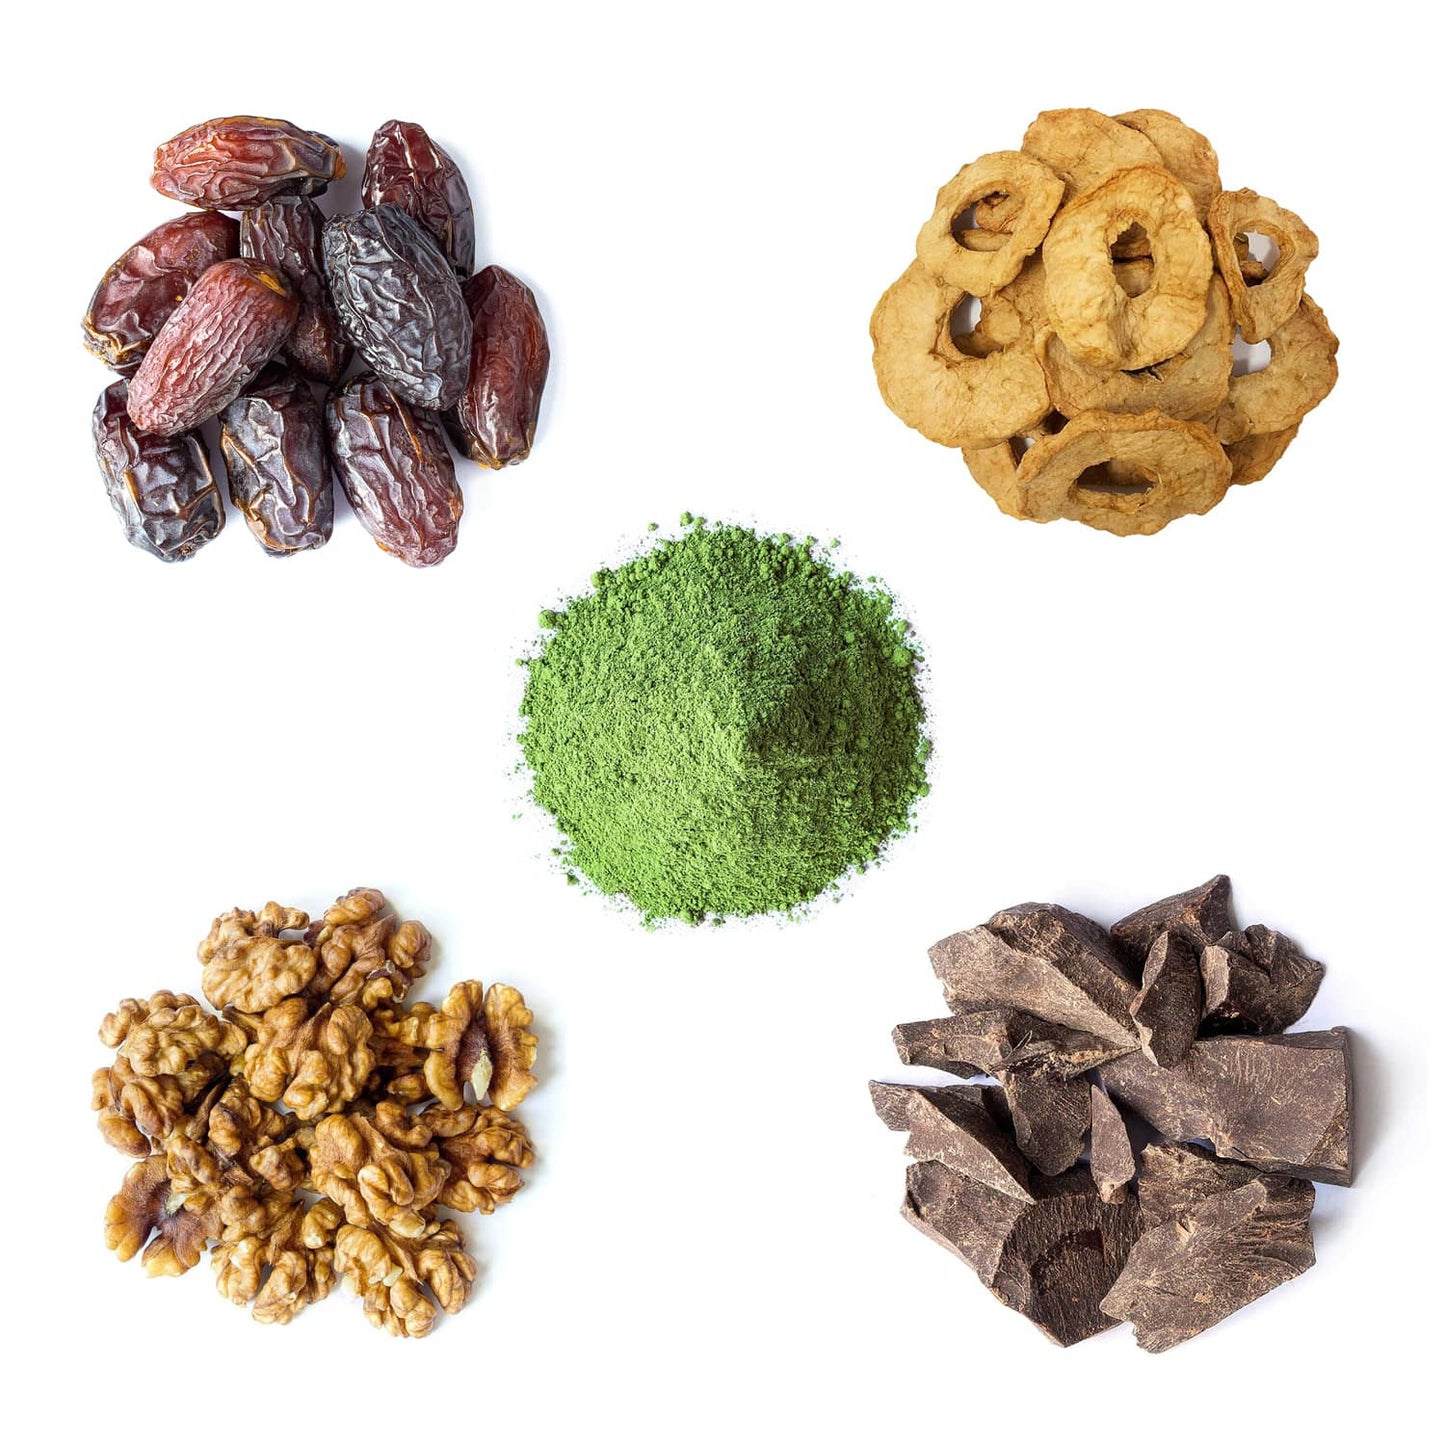 Organic Sirtfood Gift Box - Matcha Green Tea Powder, Medjool Dates, Walnuts, Dried Apples, and Cacao Paste - by Food to Live